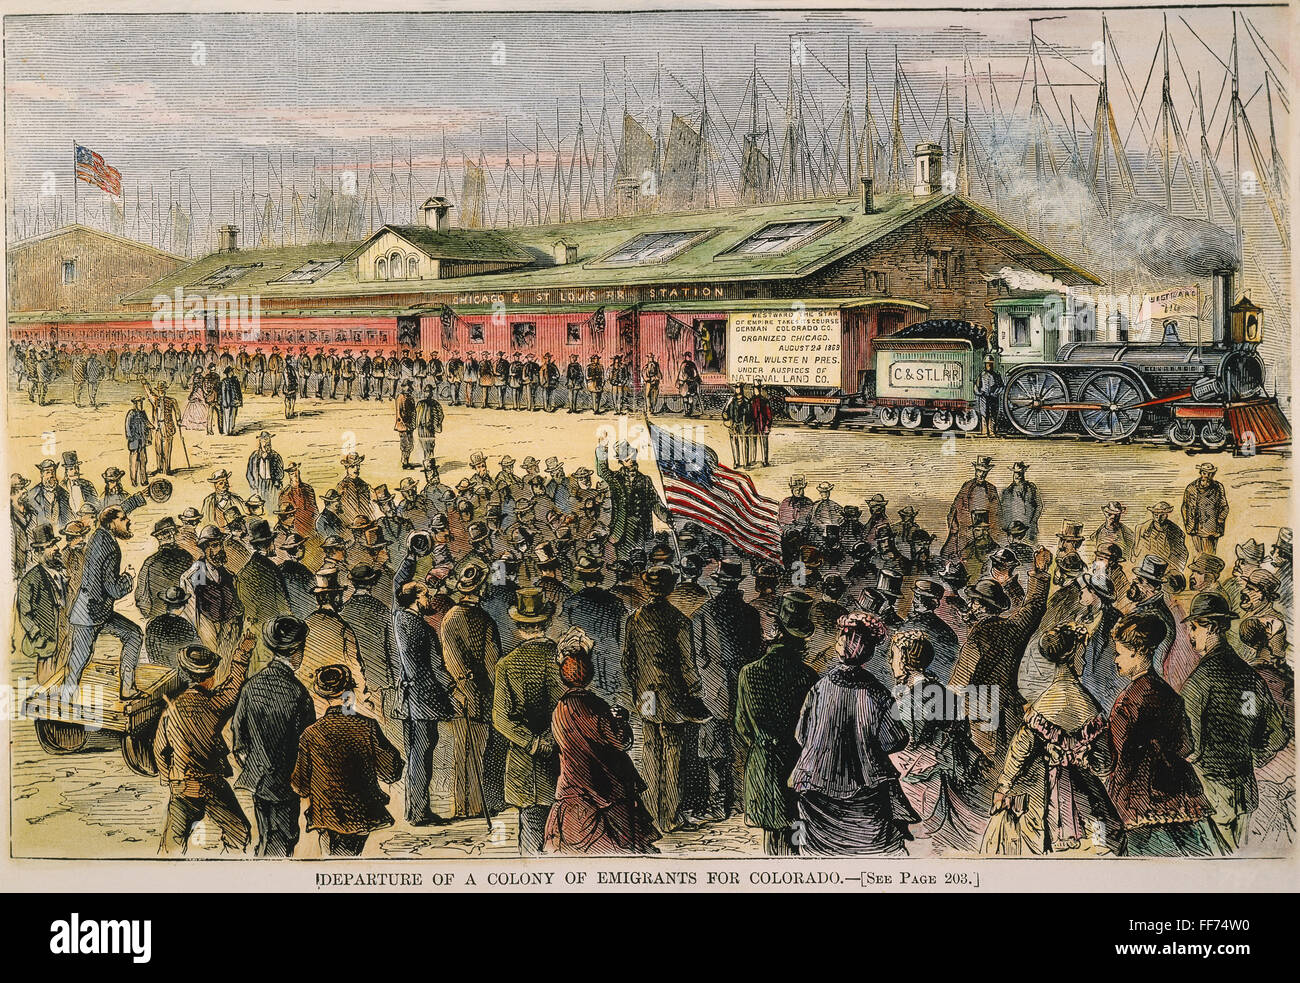 GERMAN IMMIGRANTS, 1870. /nLeaving Chicago to settle in Colfax, Colorado: colored engraving, 1870. Stock Photo